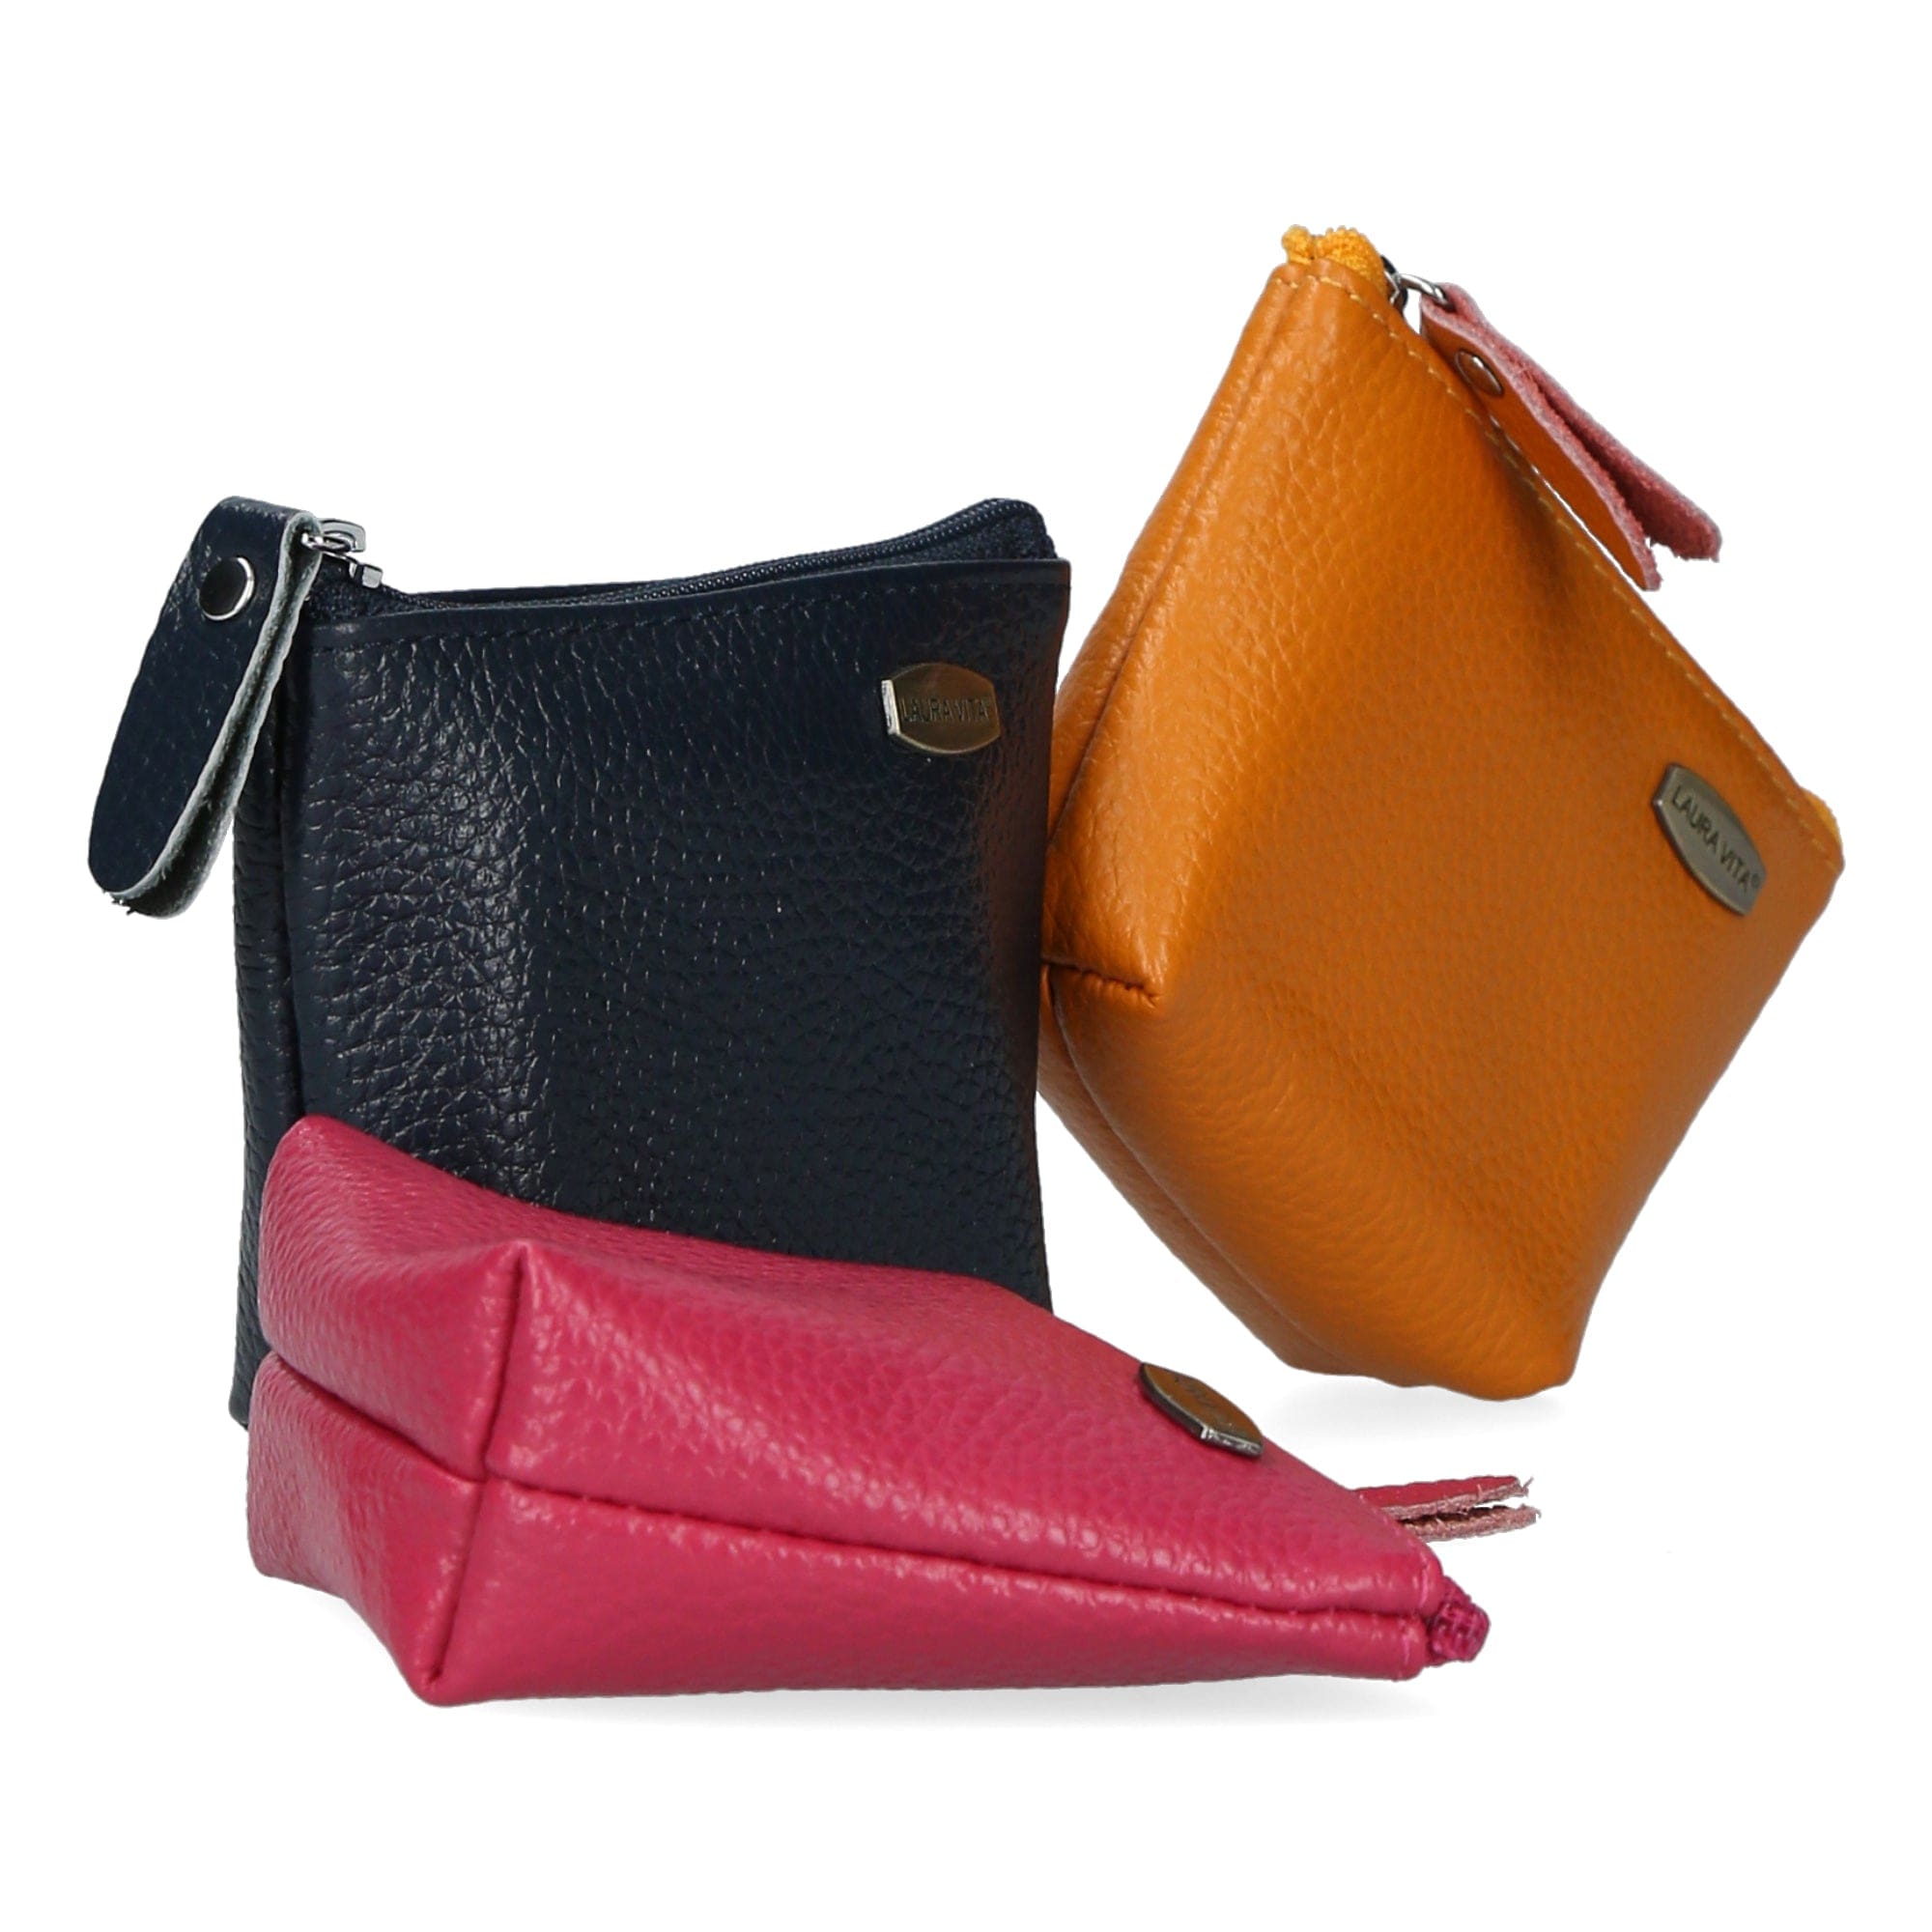 Belliard wallet - Small leather goods